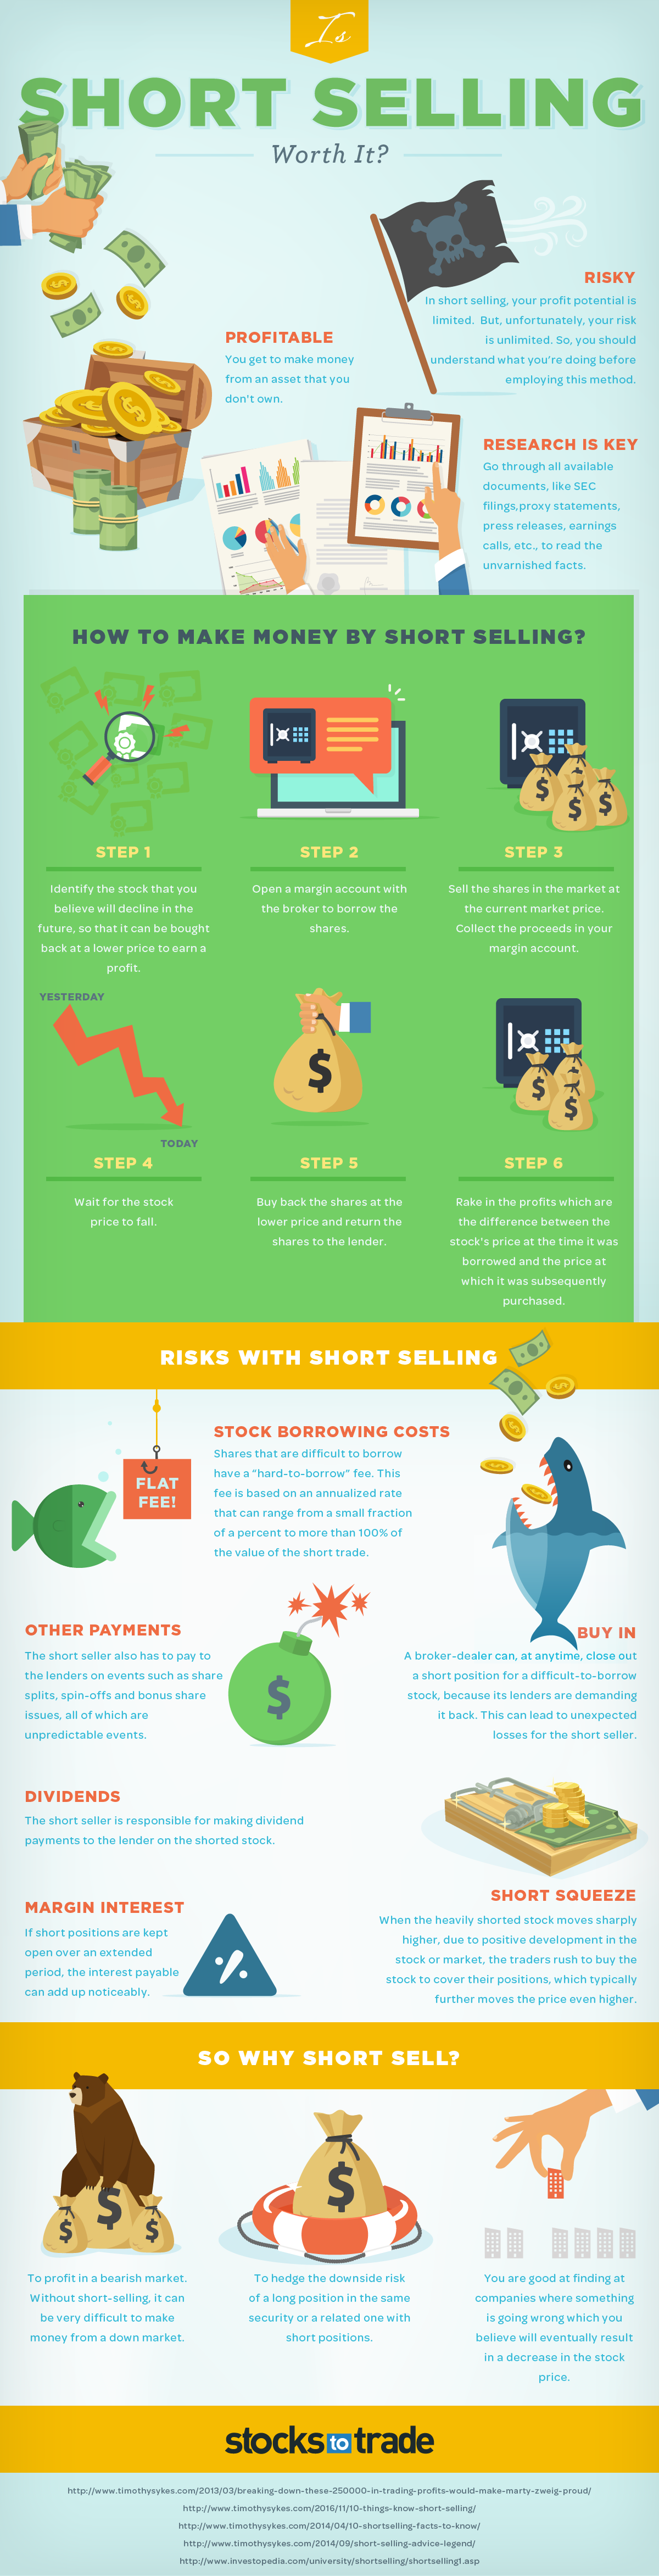 Is Short-Selling Worth It? {INFOGRAPHIC}